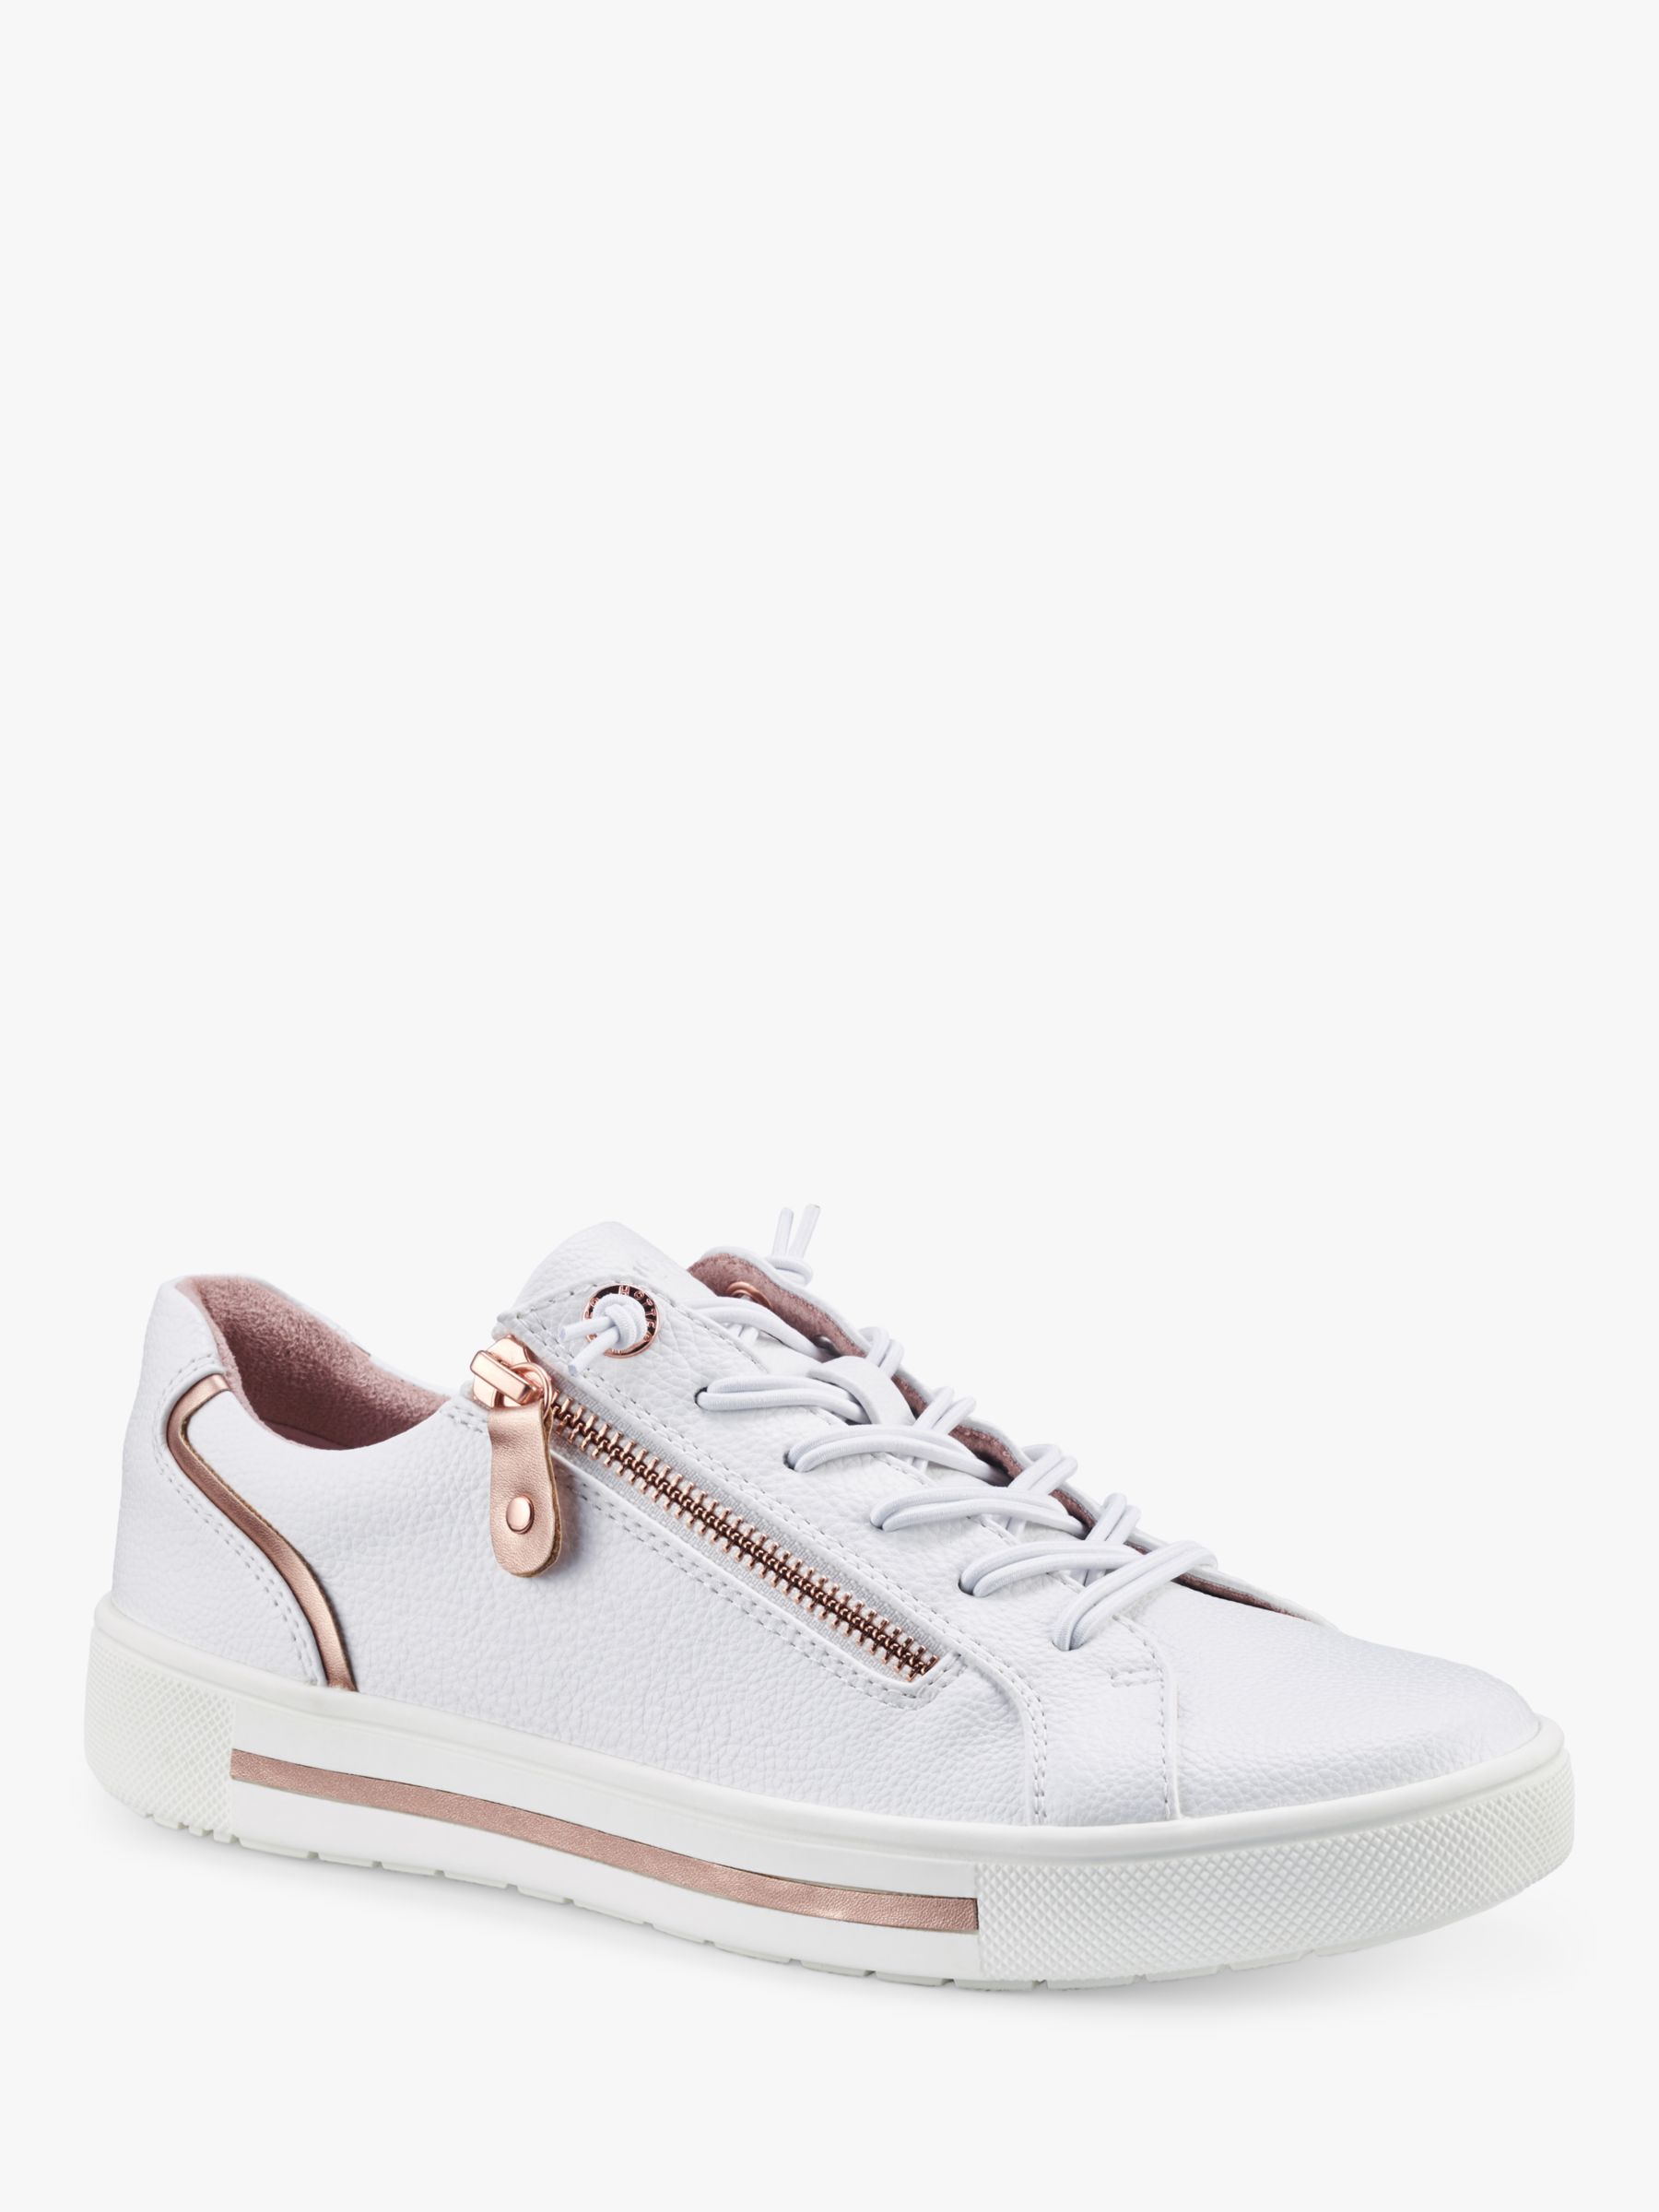 Buy Hotter Leo Zipped Trainers Online at johnlewis.com